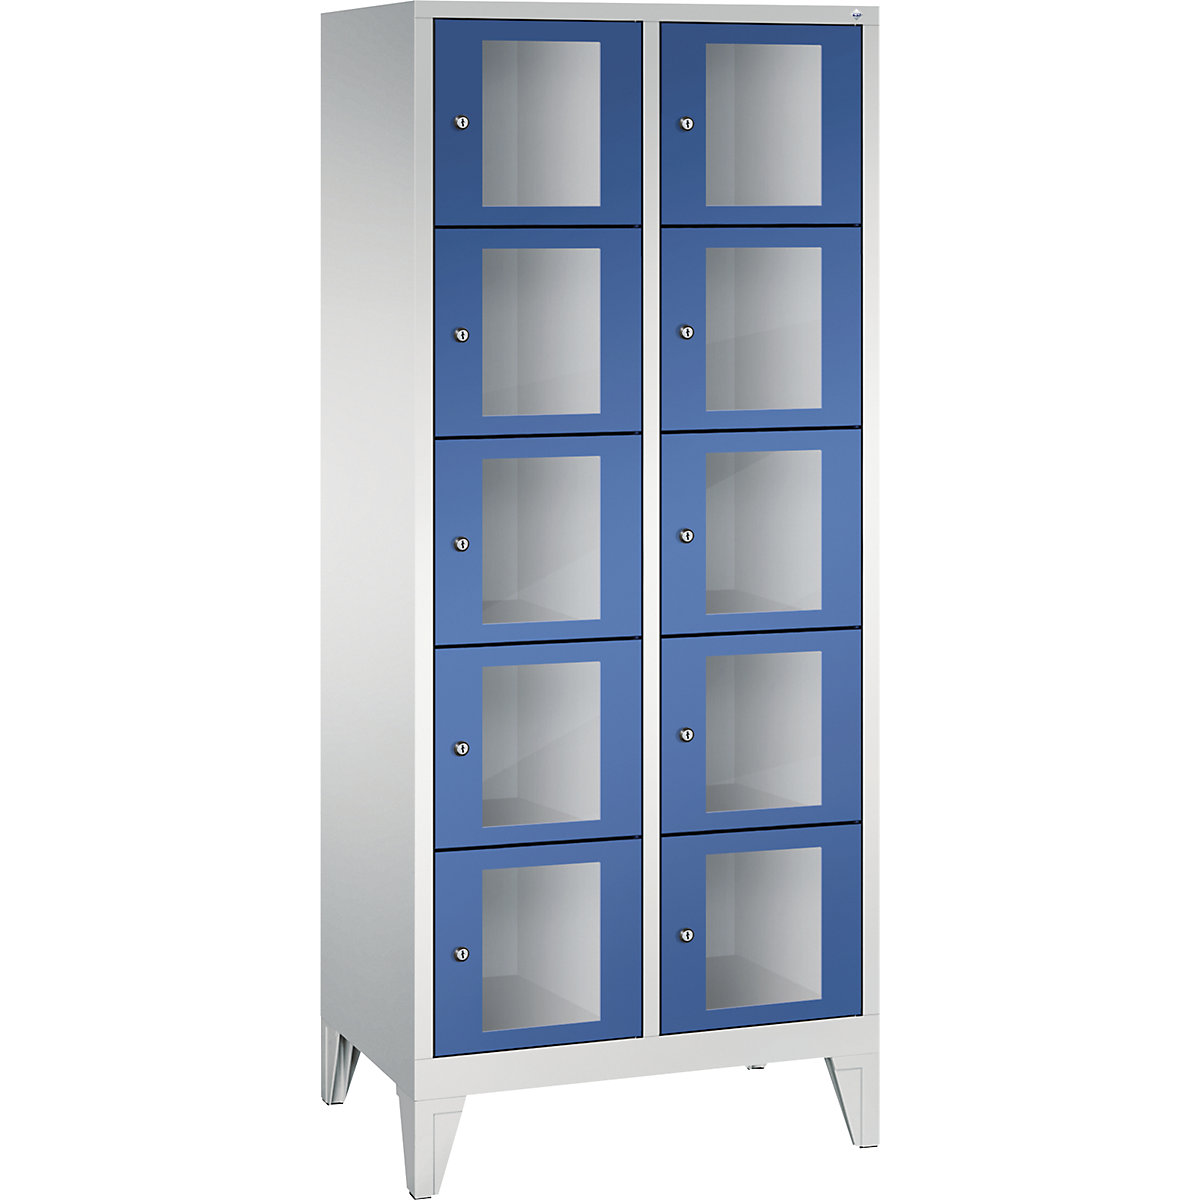 CLASSIC locker unit, compartment height 295 mm, with feet – C+P